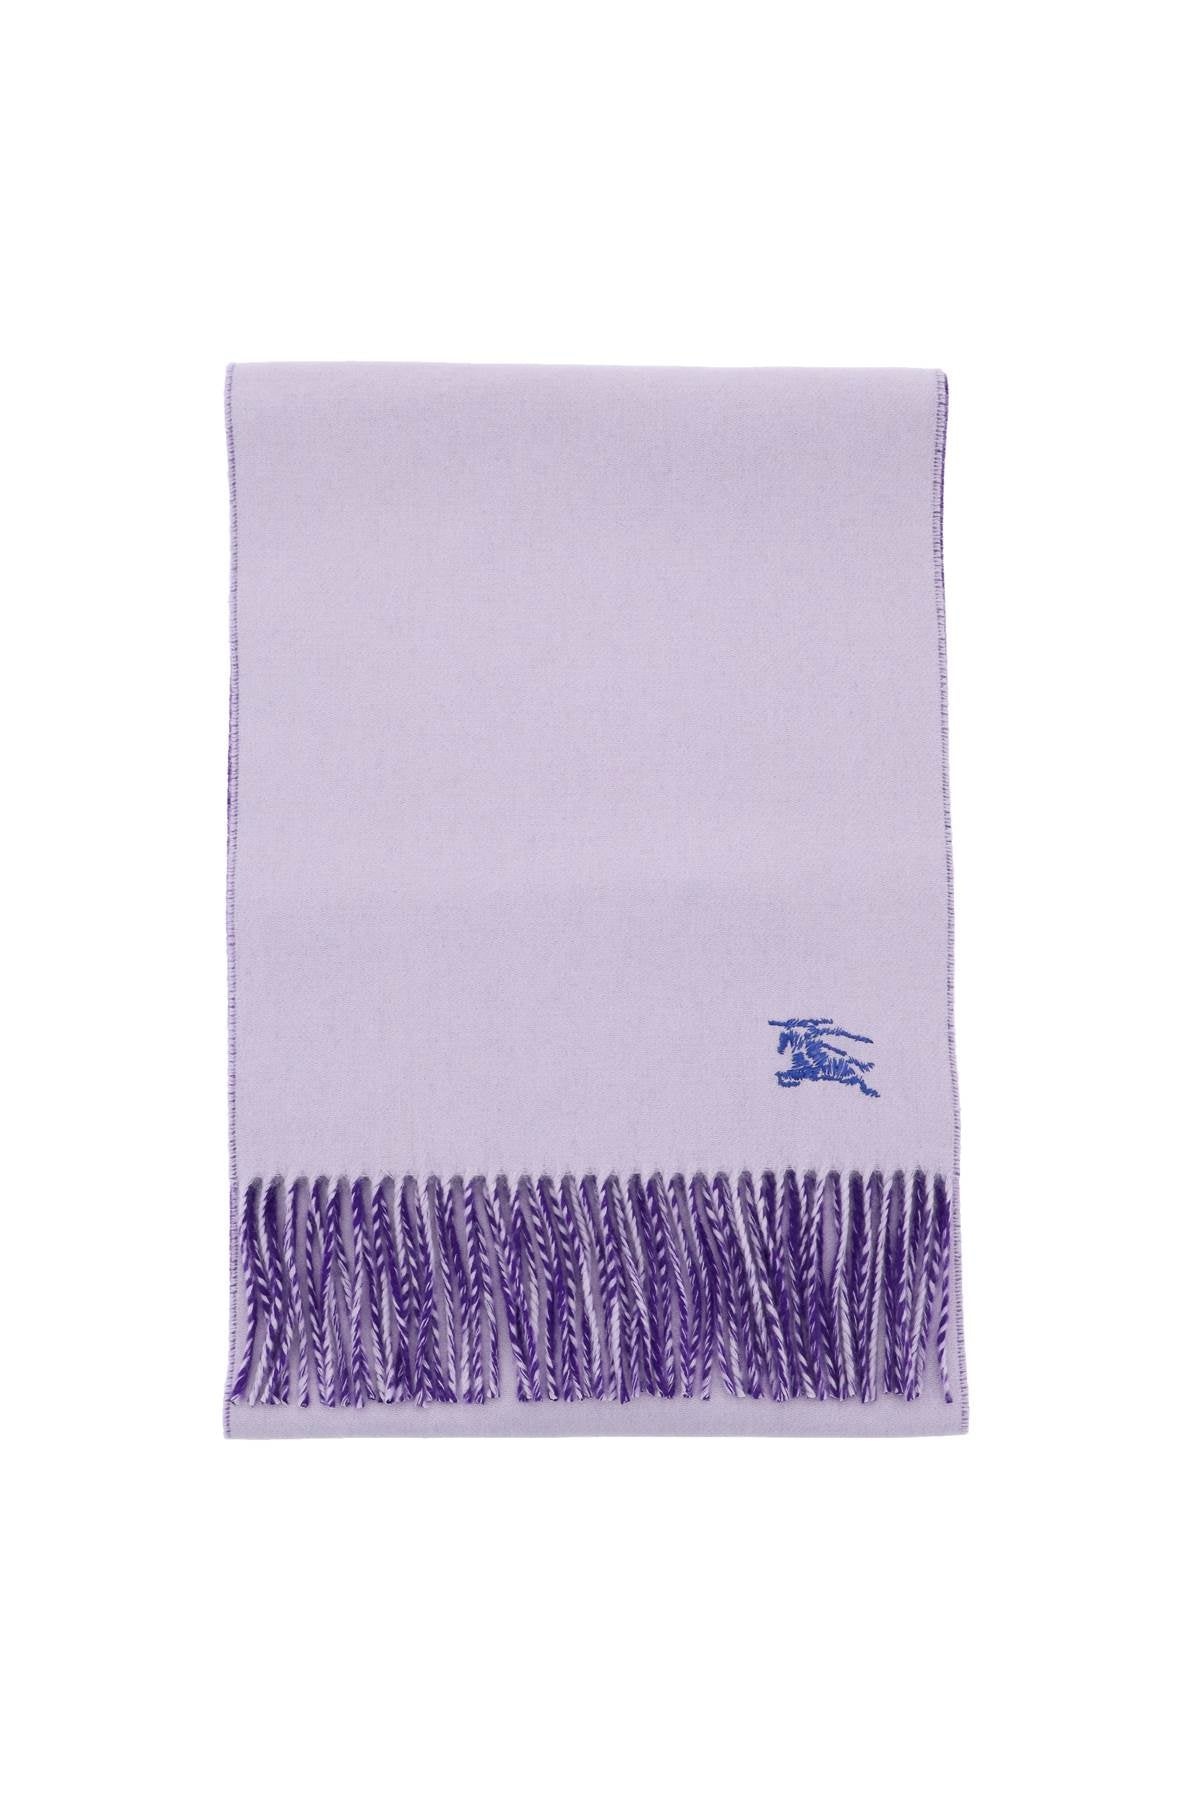 Burberry Reversible Cashmere Scarf Women - 1